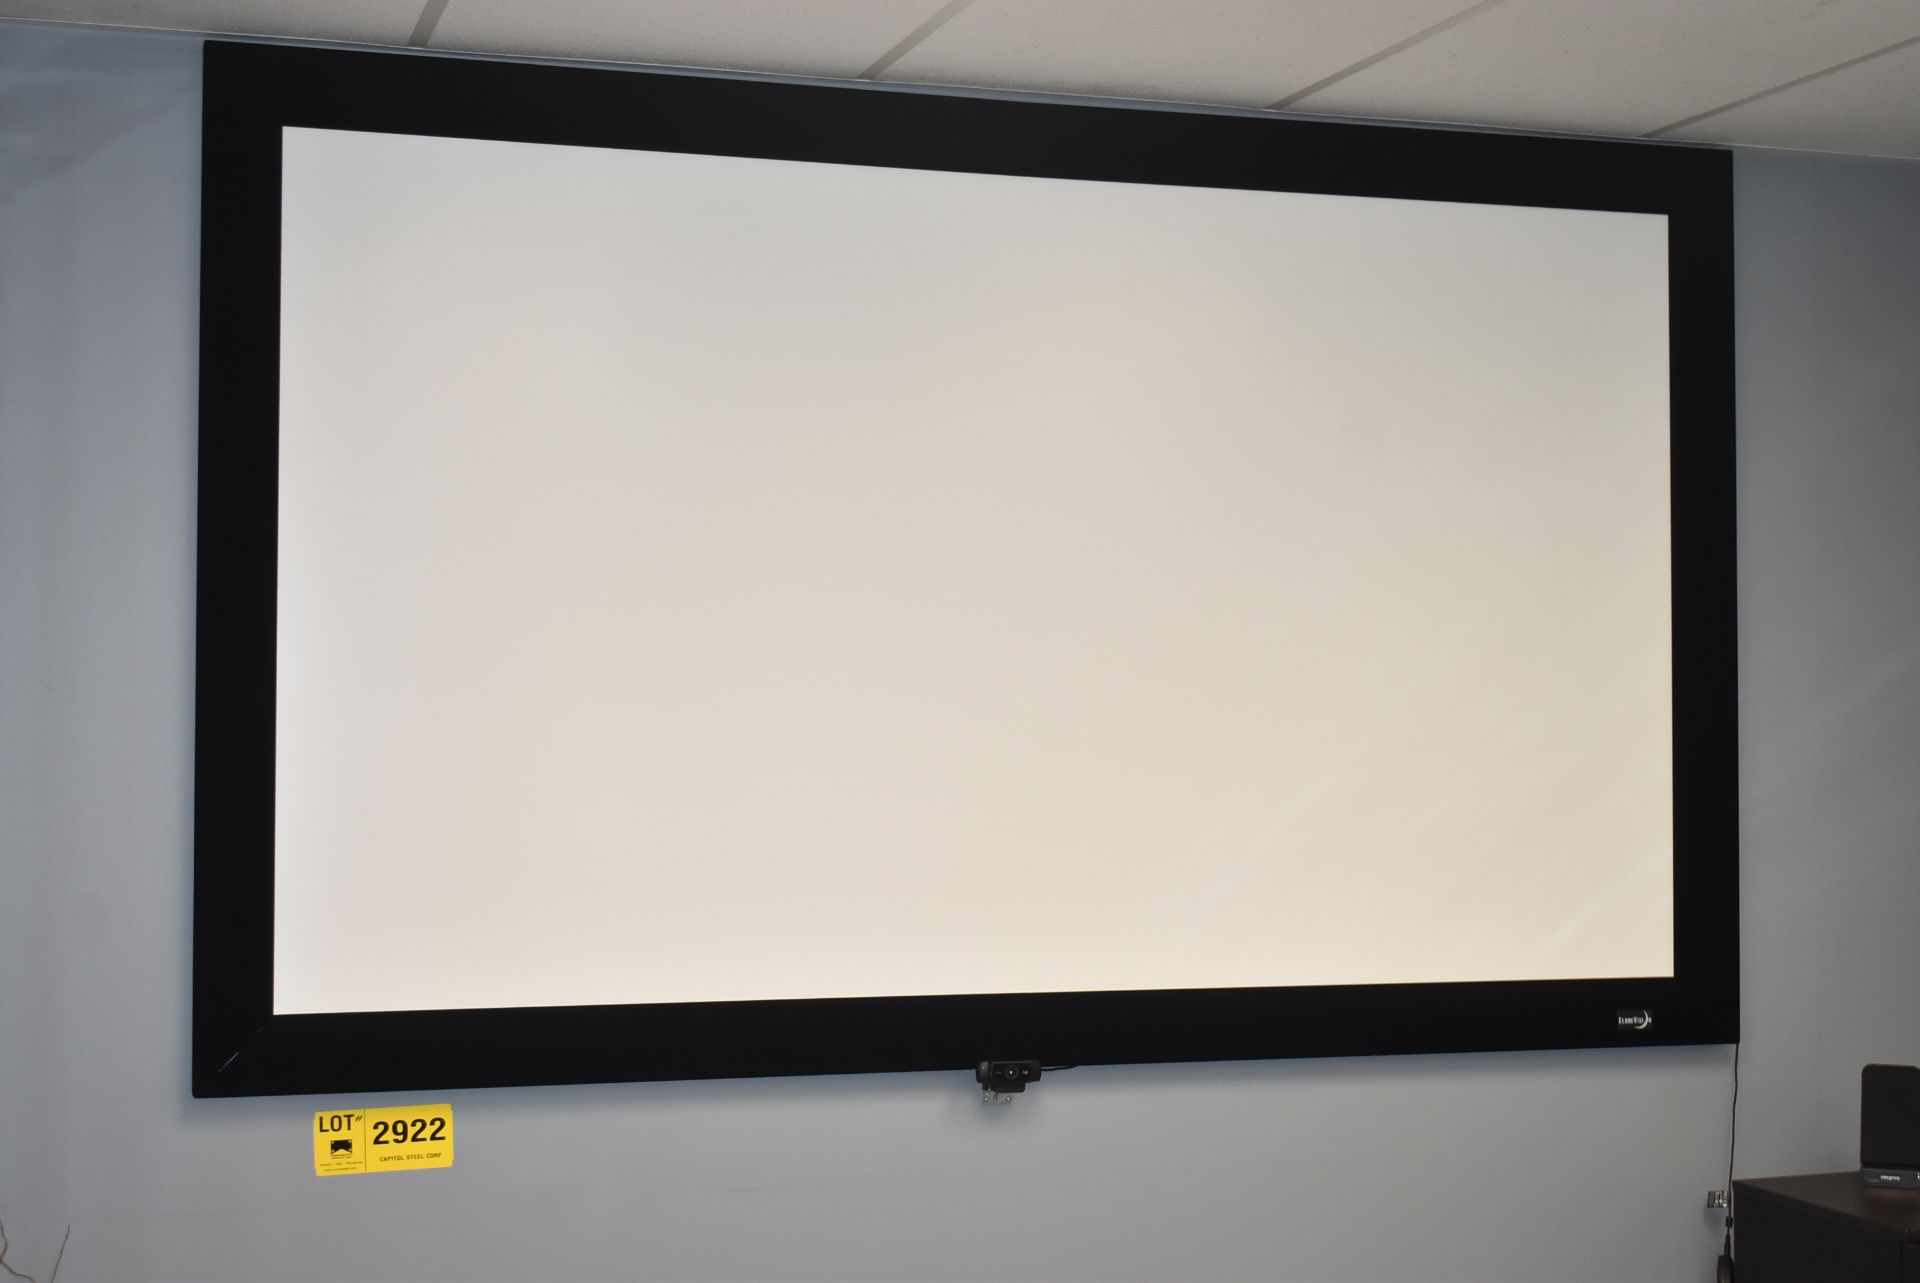 LOT/ ELUNEVISION FIXED FRAME PROJECTION SCREEN WITH BENO CEILING MOUNTED PROJECTOR - Image 2 of 7